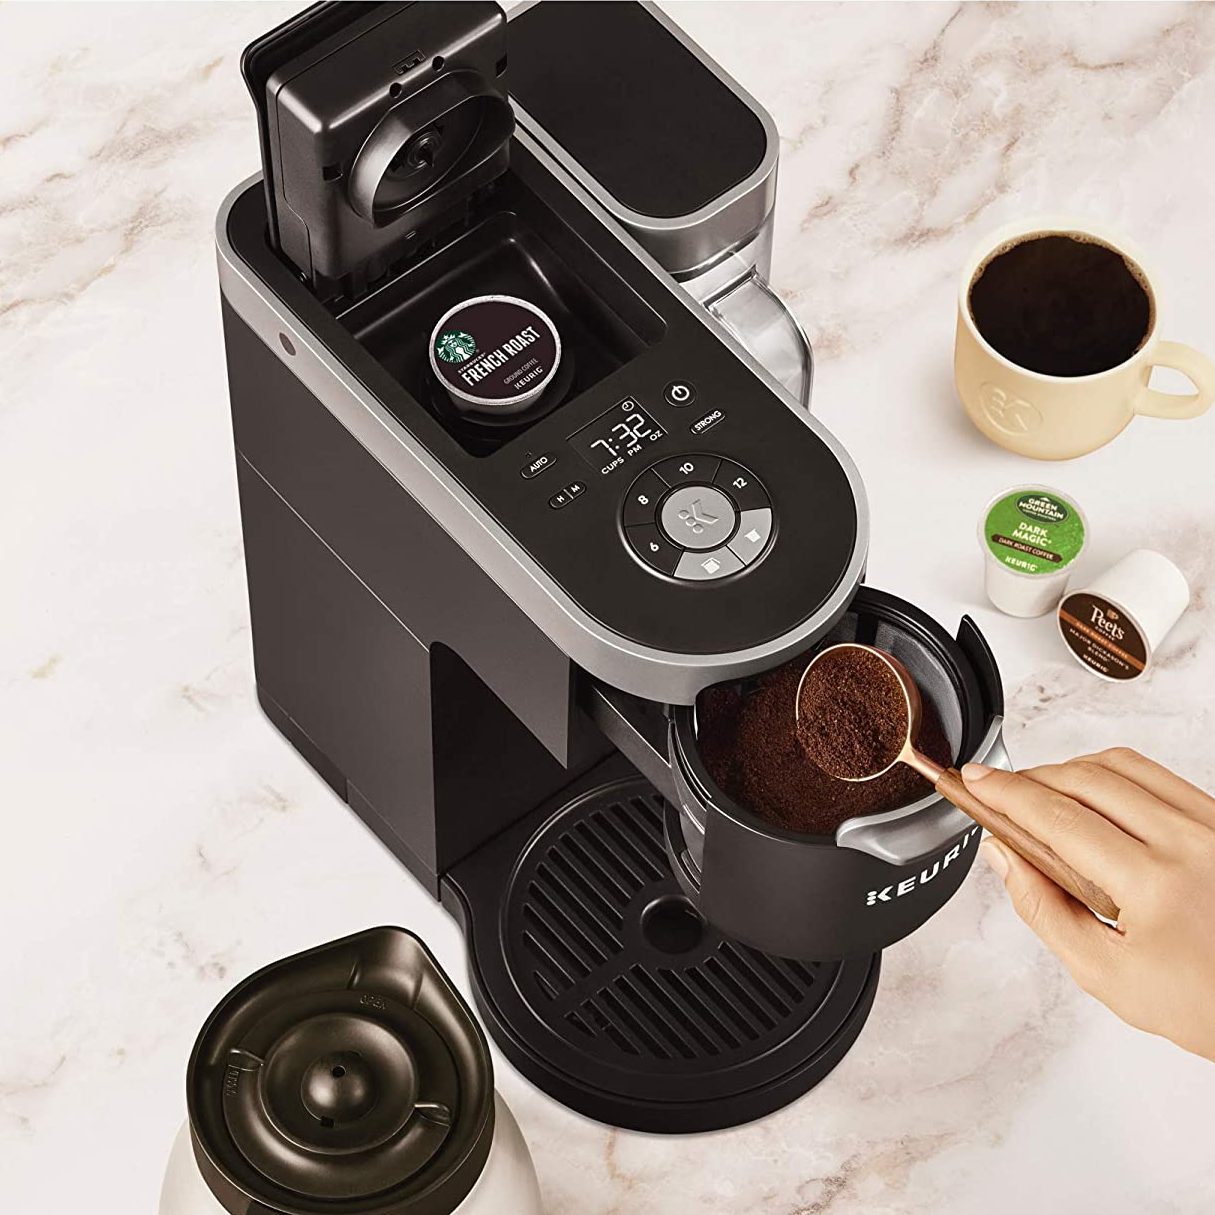 The 4 best single-serve coffee makers of 2022